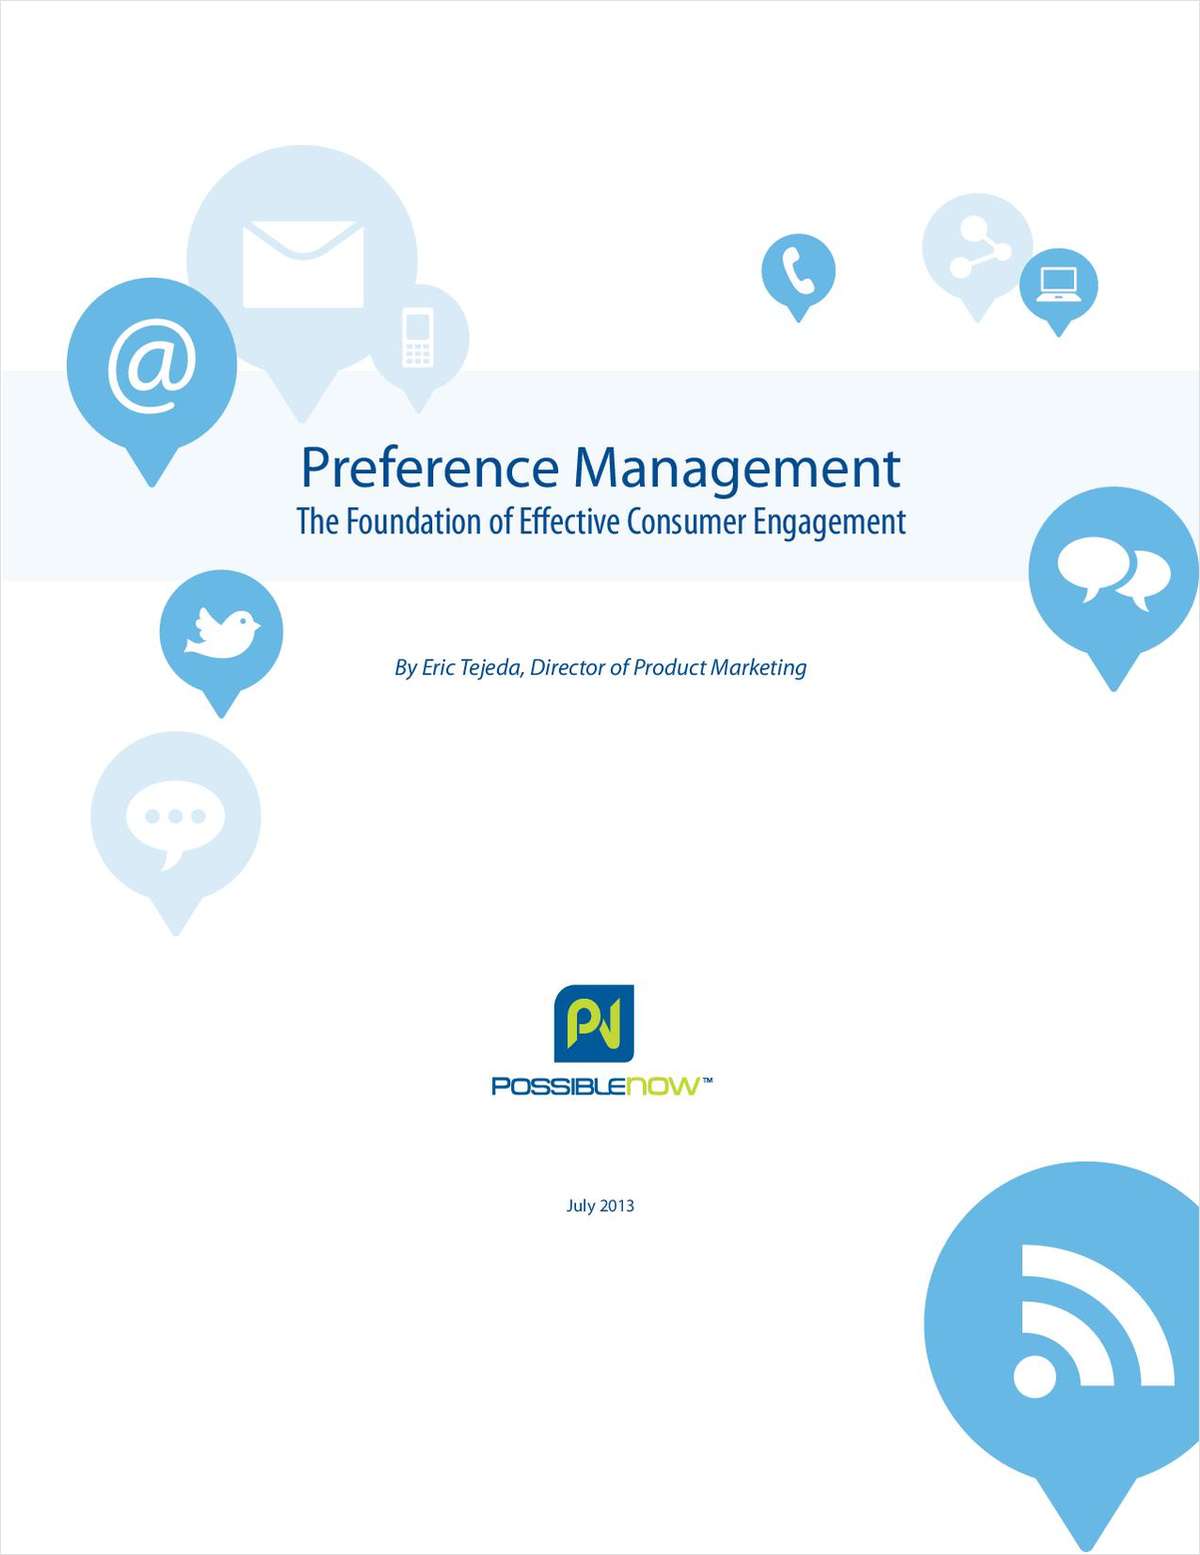 Preference Management: The Foundation of Effective Consumer Engagement